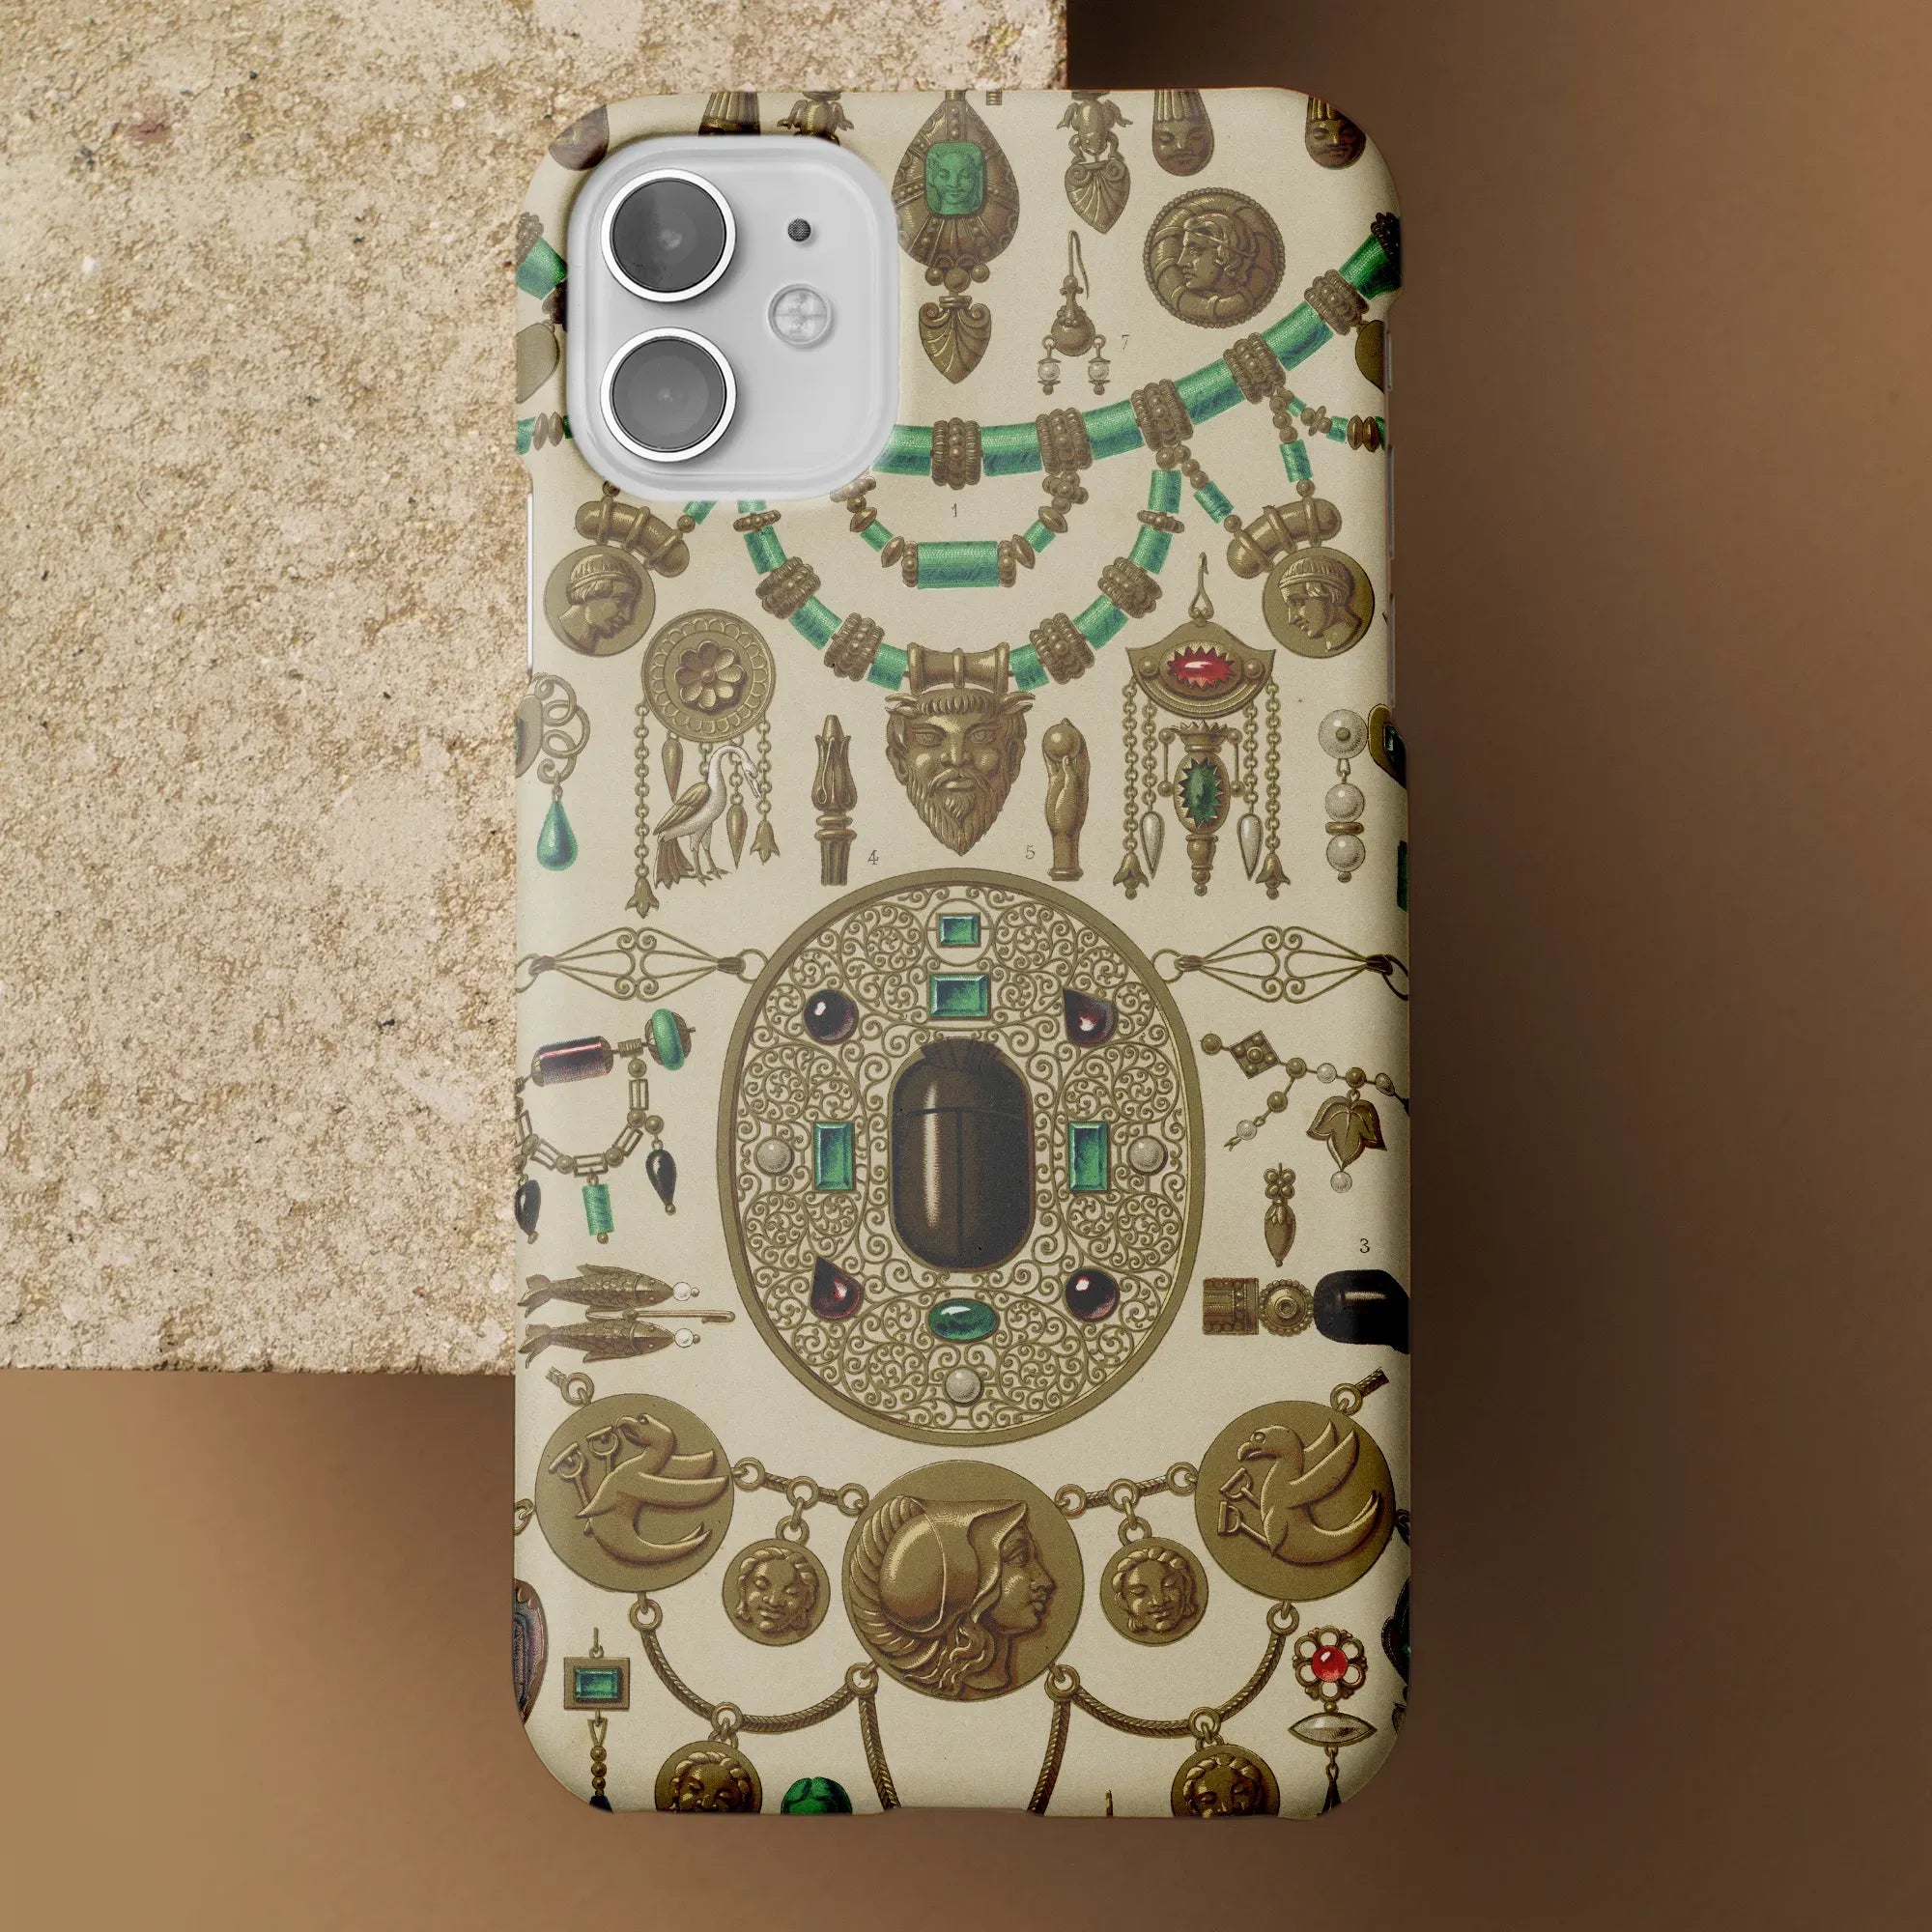 Etruscan Jewelry By Auguste Racinet Art Phone Case - Mobile Phone Cases - Aesthetic Art